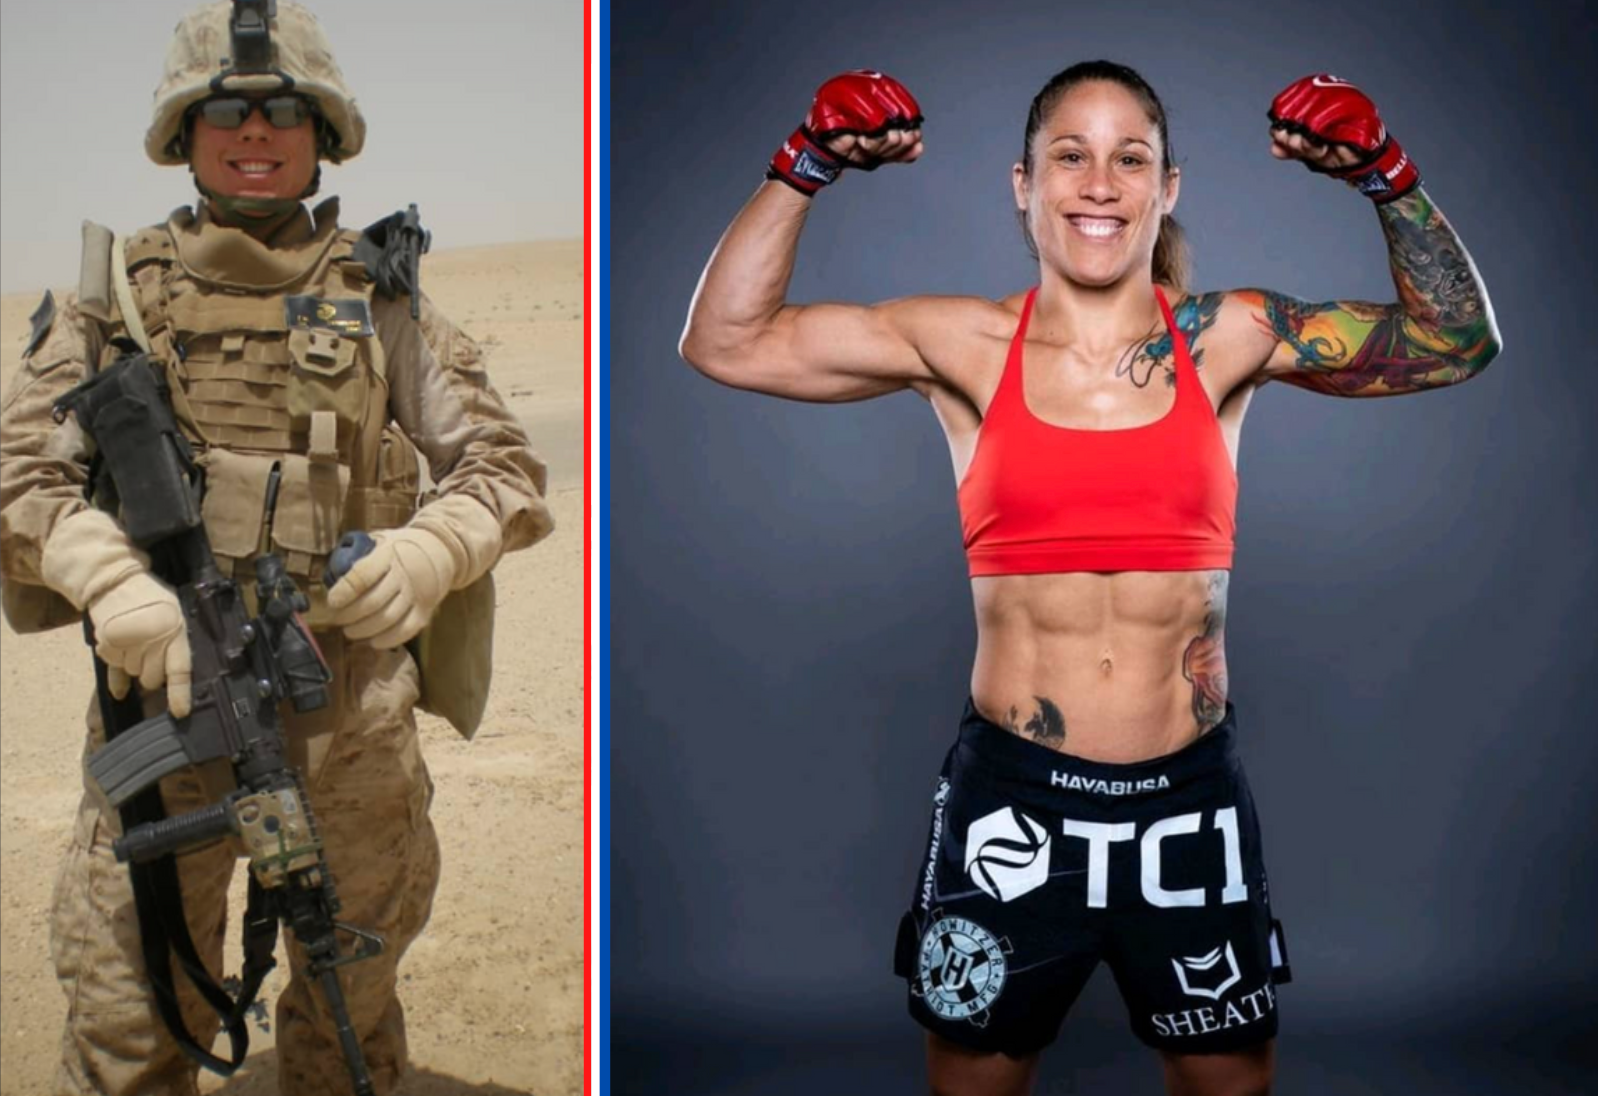 Watch this female MMA fighter and combat-veteran Marine share her home base